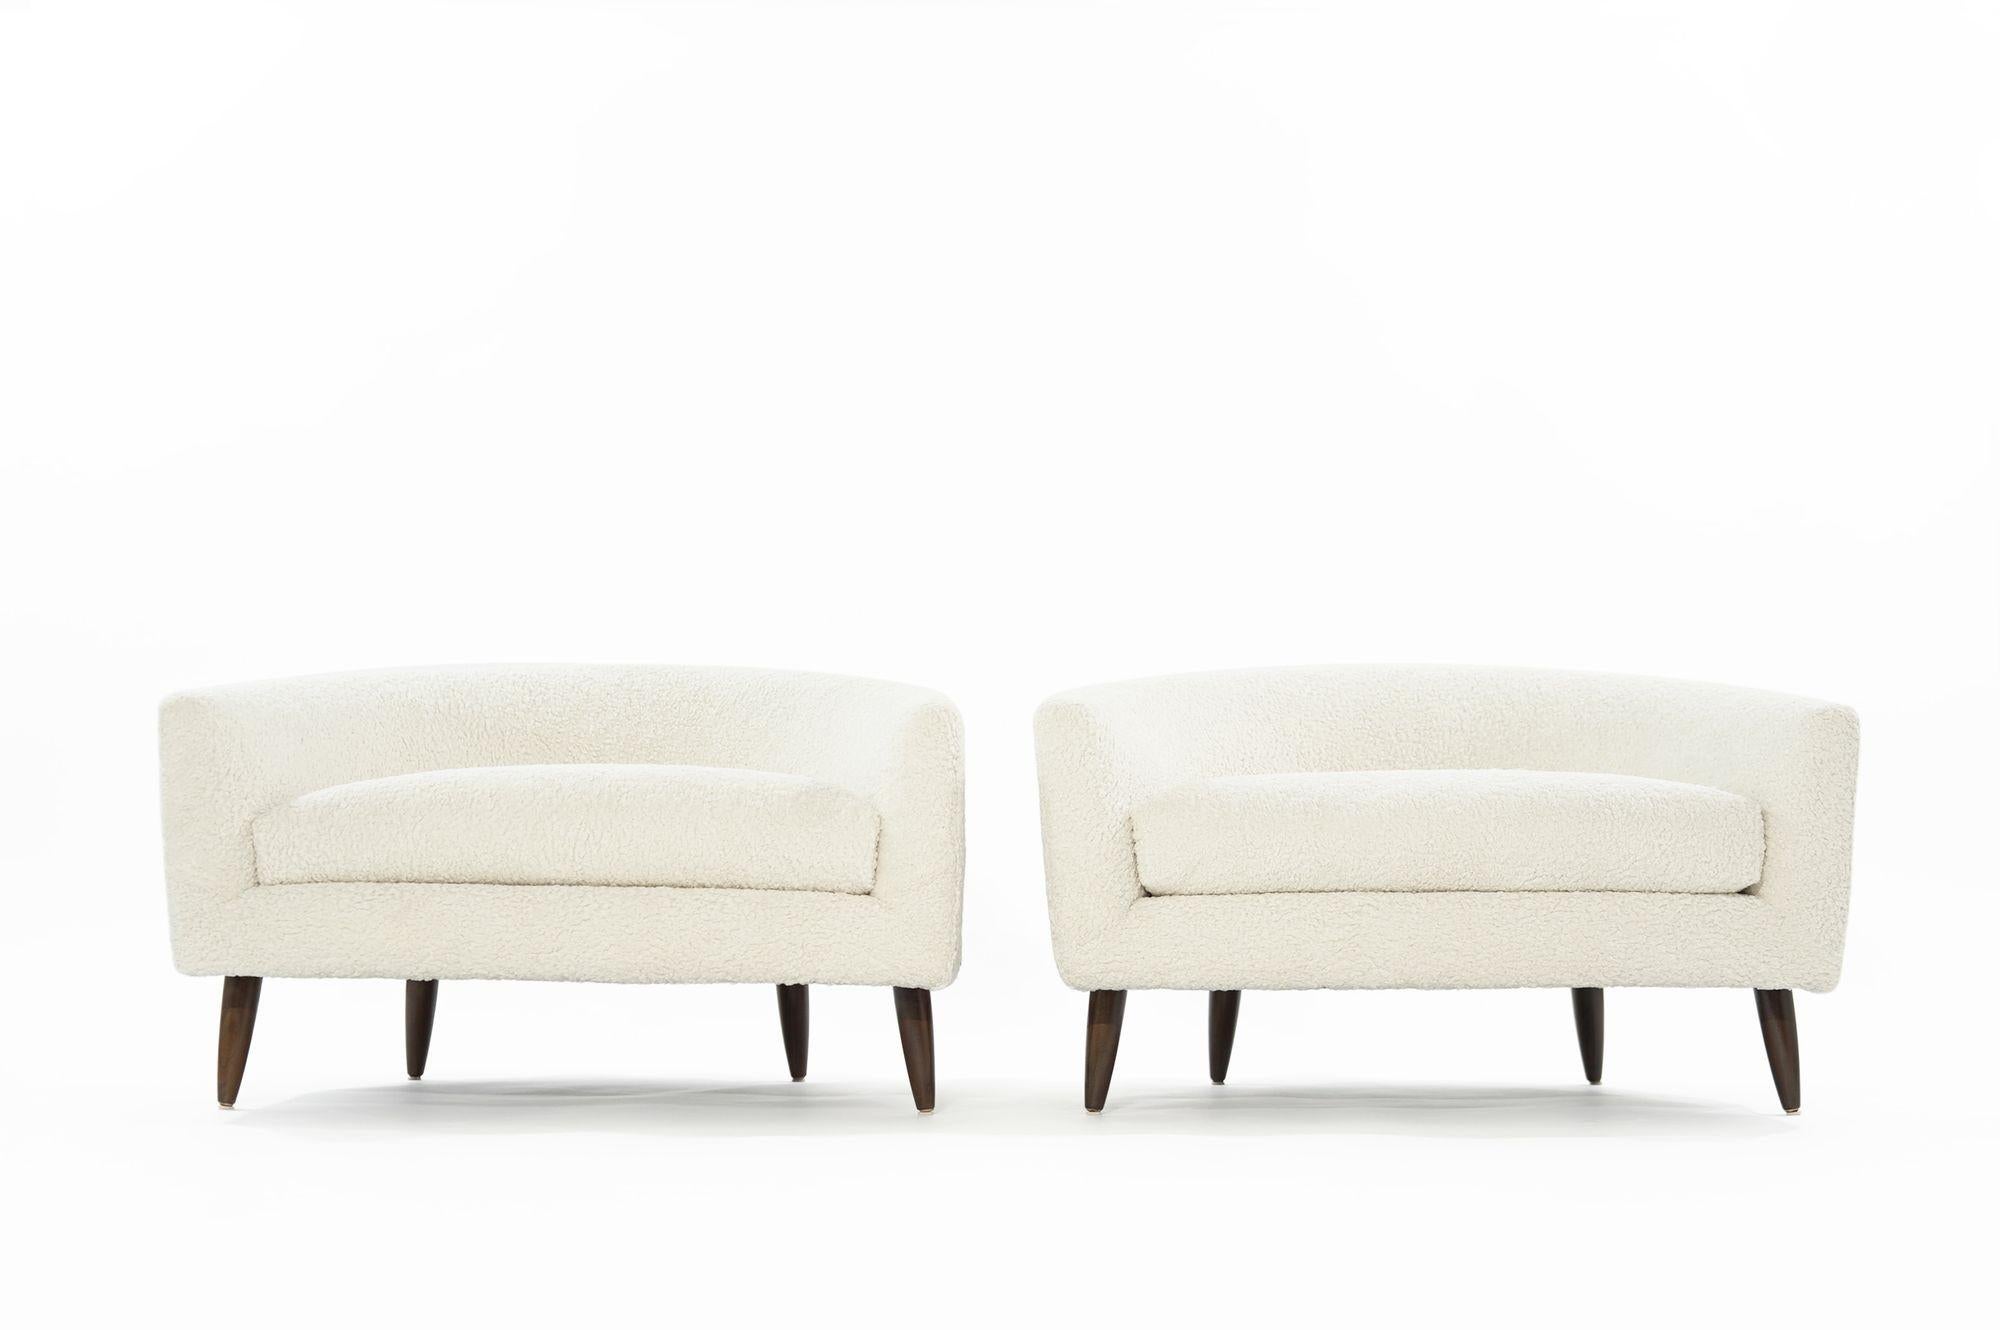 Rare pair of low and wide profile, lounge chairs designed by Adrian Pearsall for Craft Associates. Extremely comfortable! Perhaps one of Adrian's best designs. Completely restored with all insides fully updated unsing high-grade hand-cut foam, newly